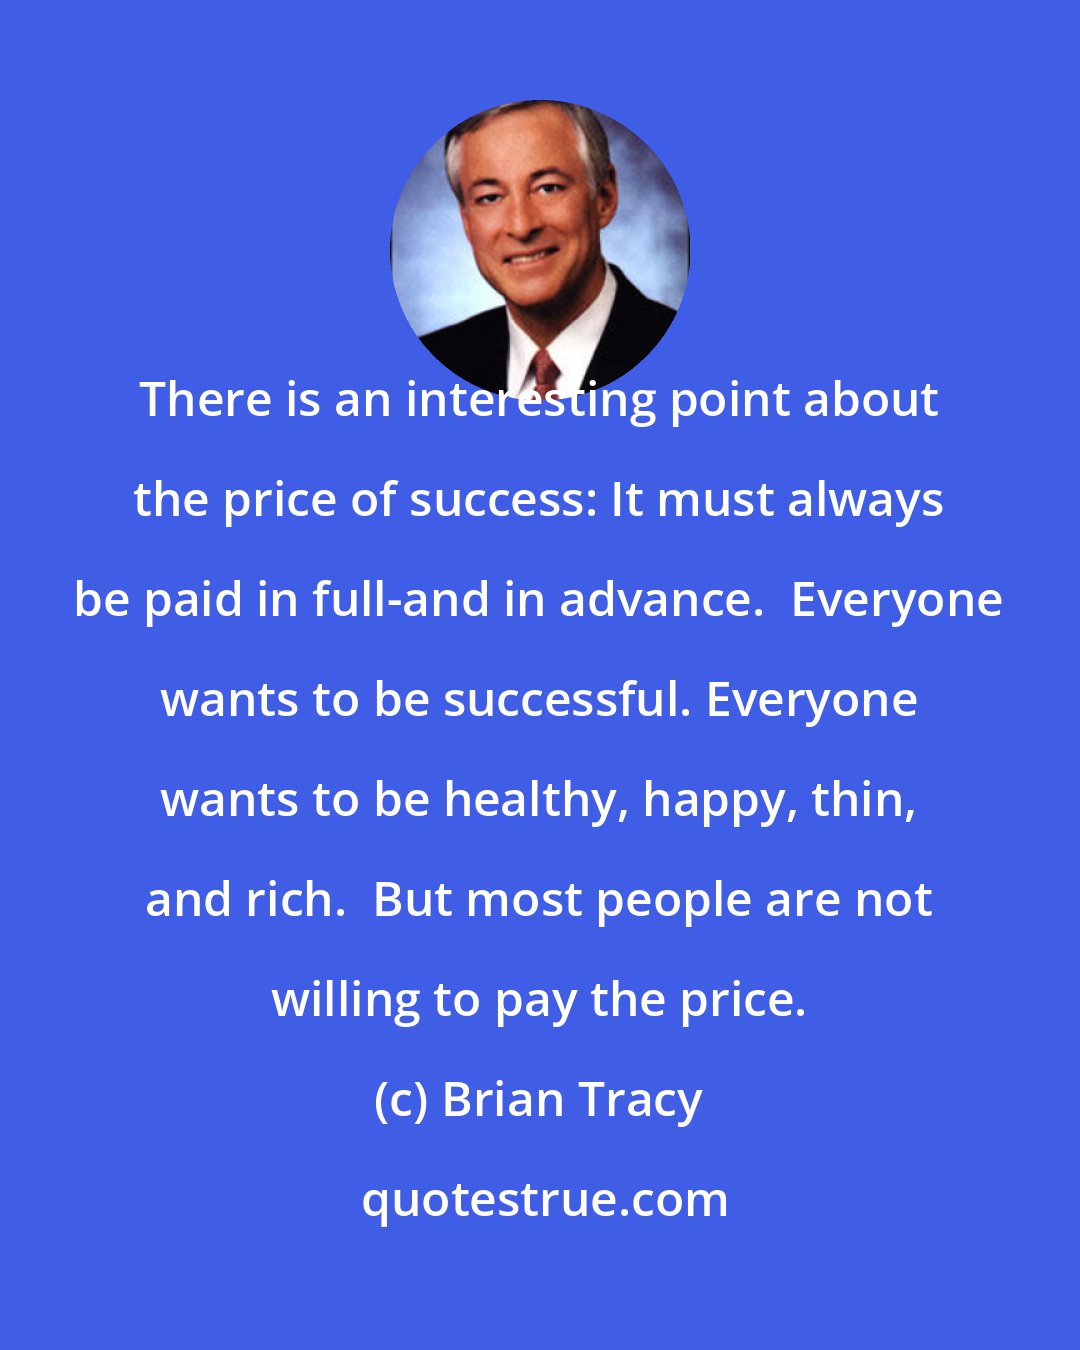 Brian Tracy: There is an interesting point about the price of success: It must always be paid in full-and in advance.  Everyone wants to be successful. Everyone wants to be healthy, happy, thin, and rich.  But most people are not willing to pay the price.